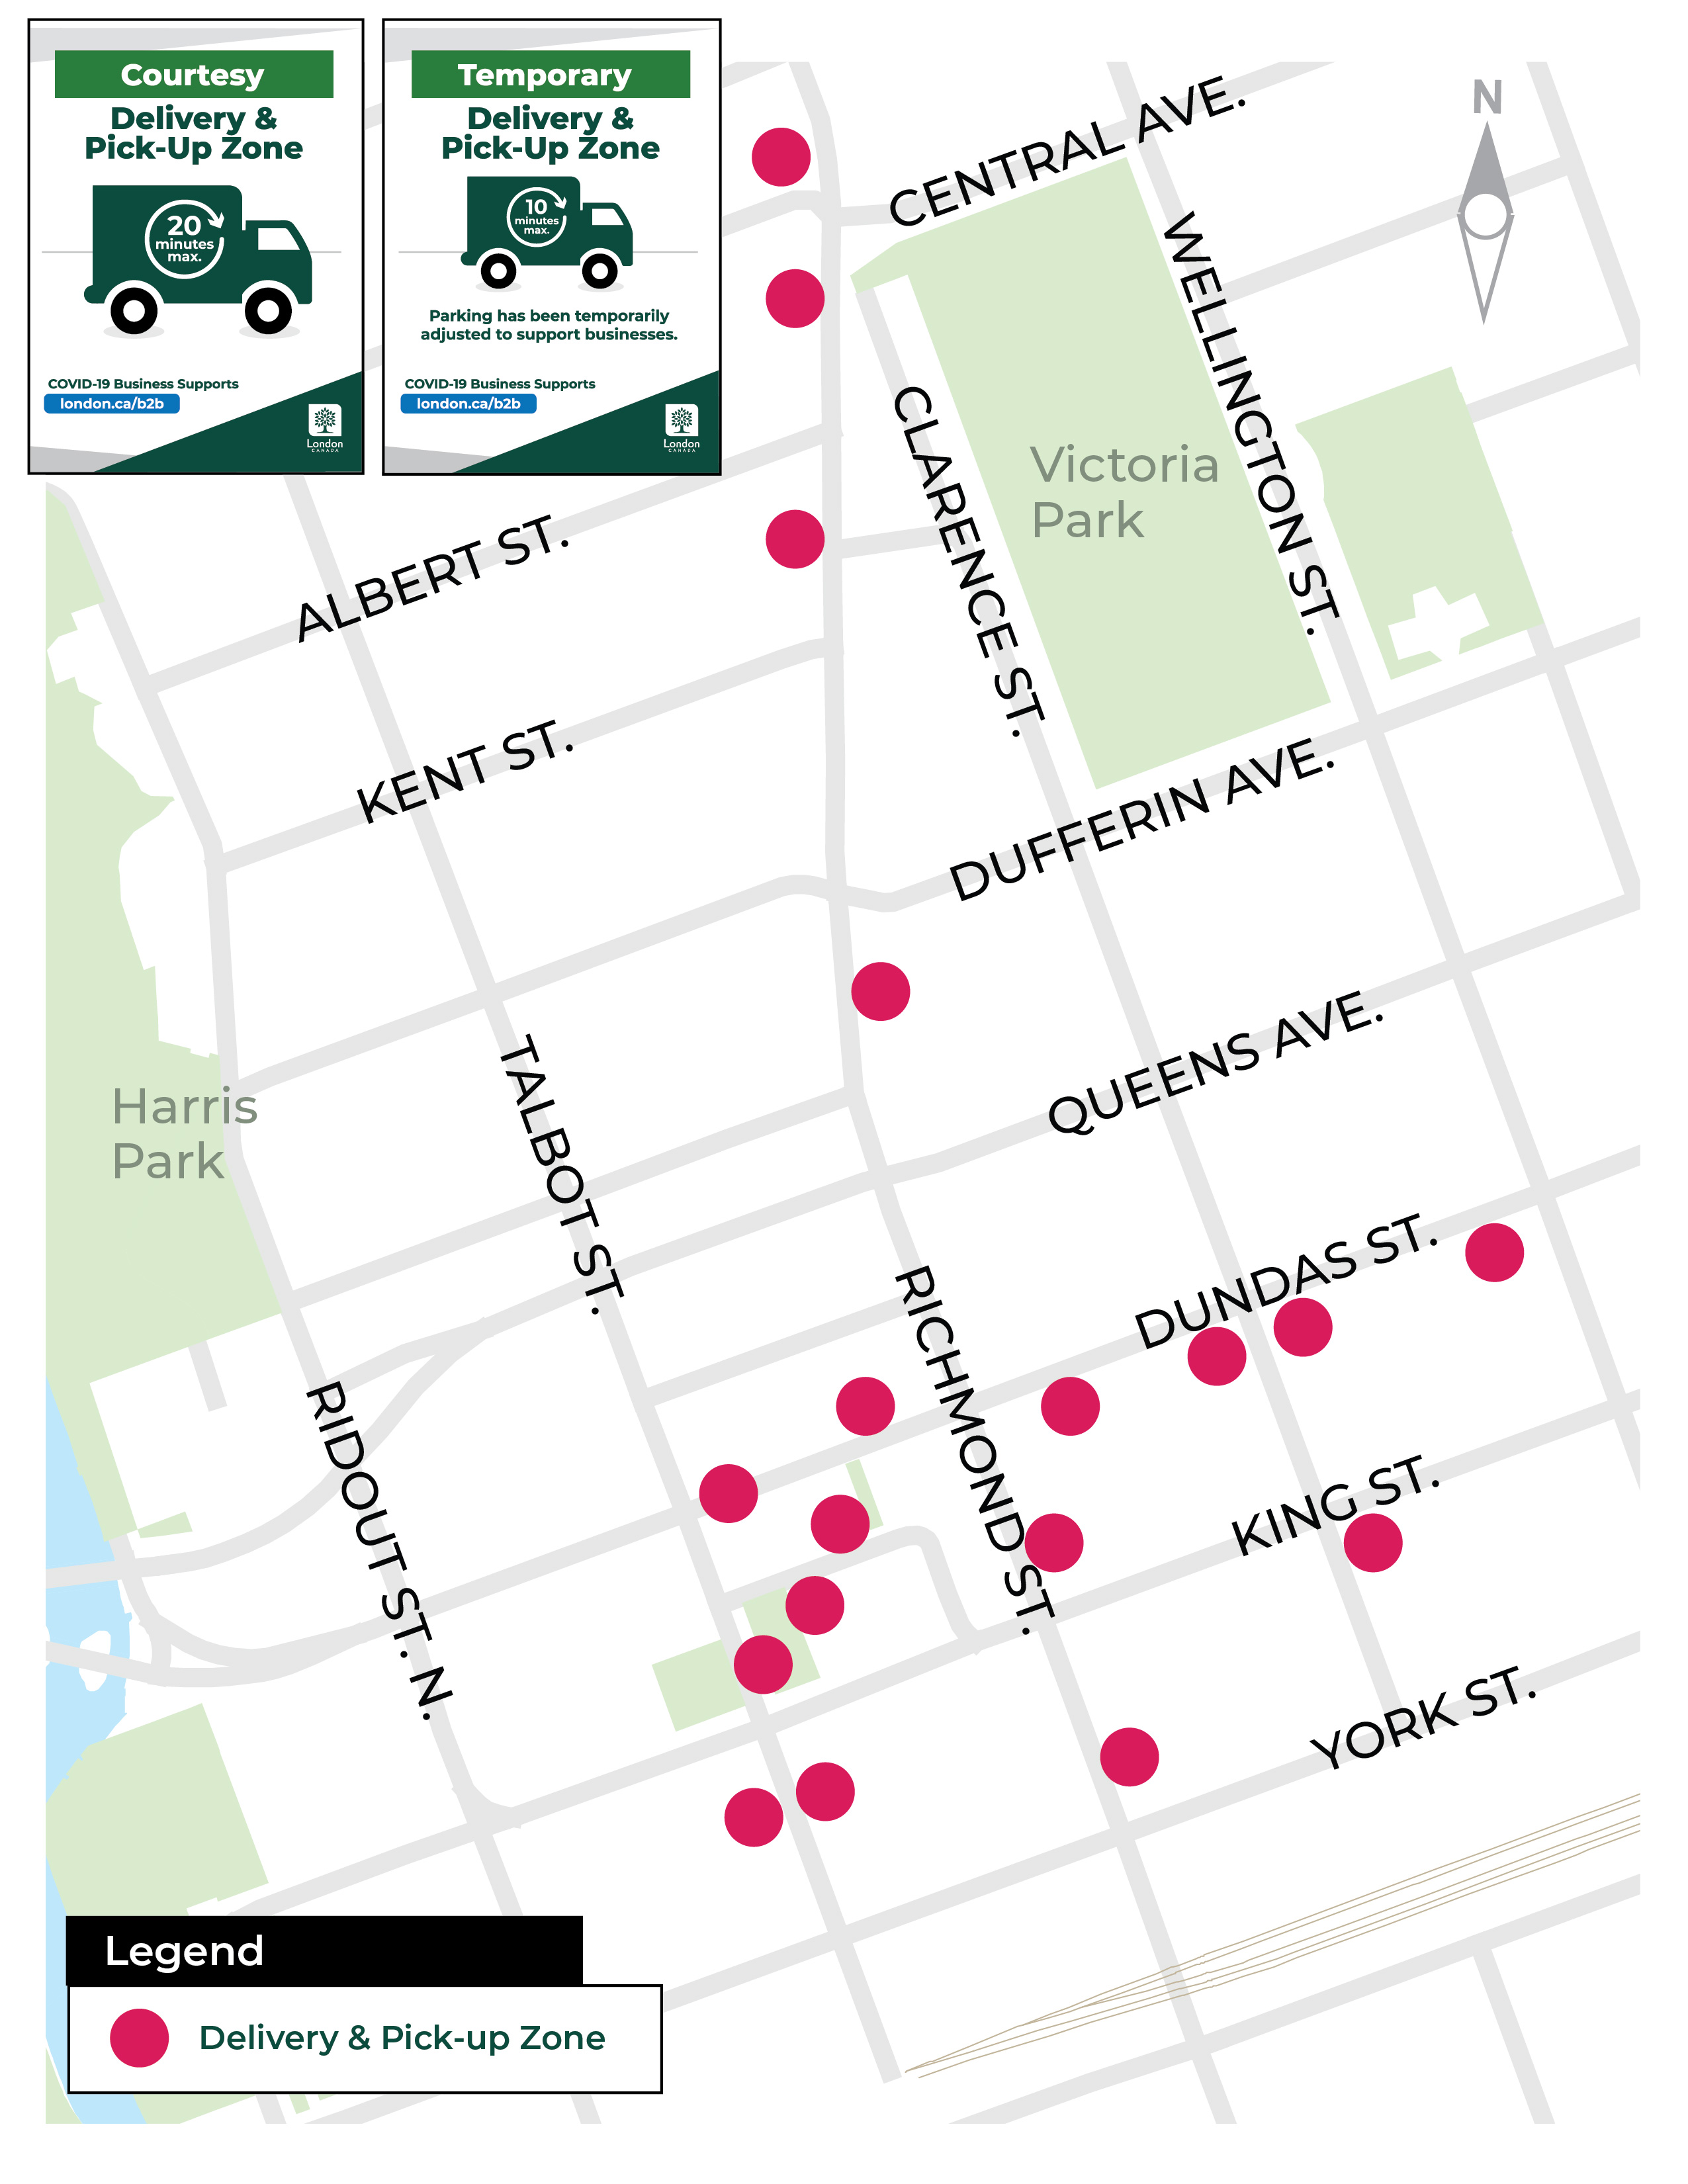 A map of park and pick-up locations downtown. For more information, please contact Parking Services at ParkingEnforcement@london.ca or by calling 519-661-4537